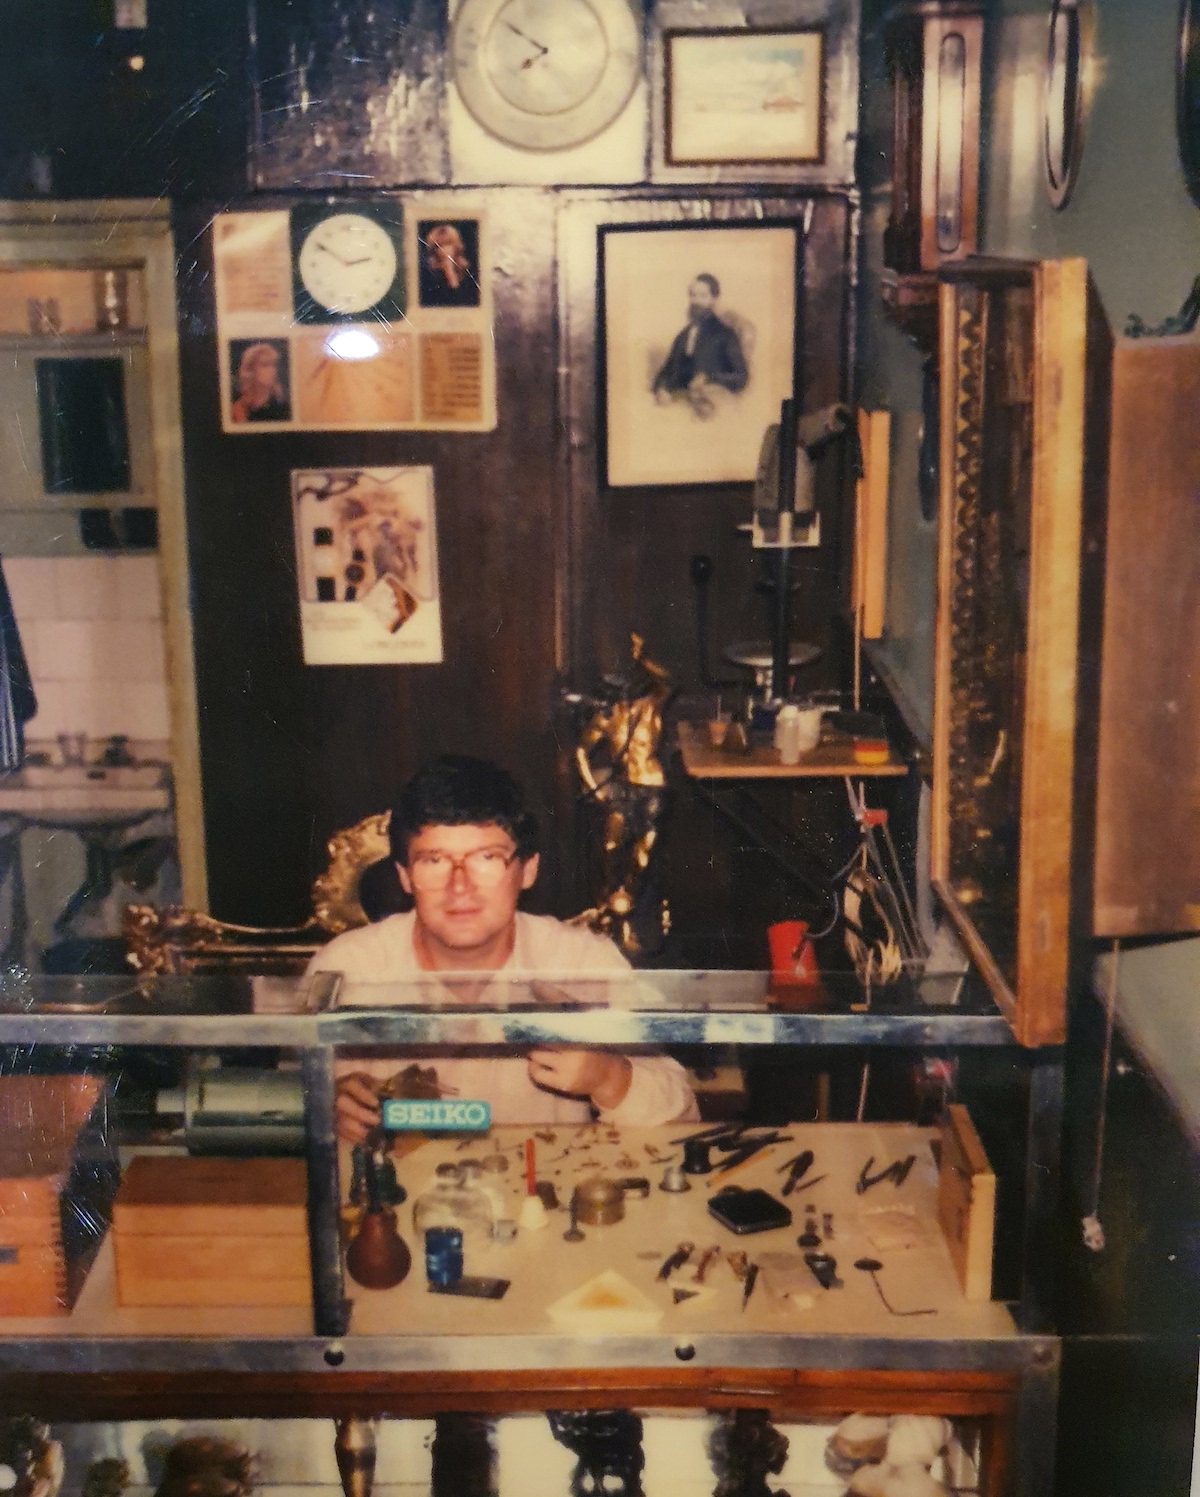 Aaron Becsei's father, at his grandfather's workshop